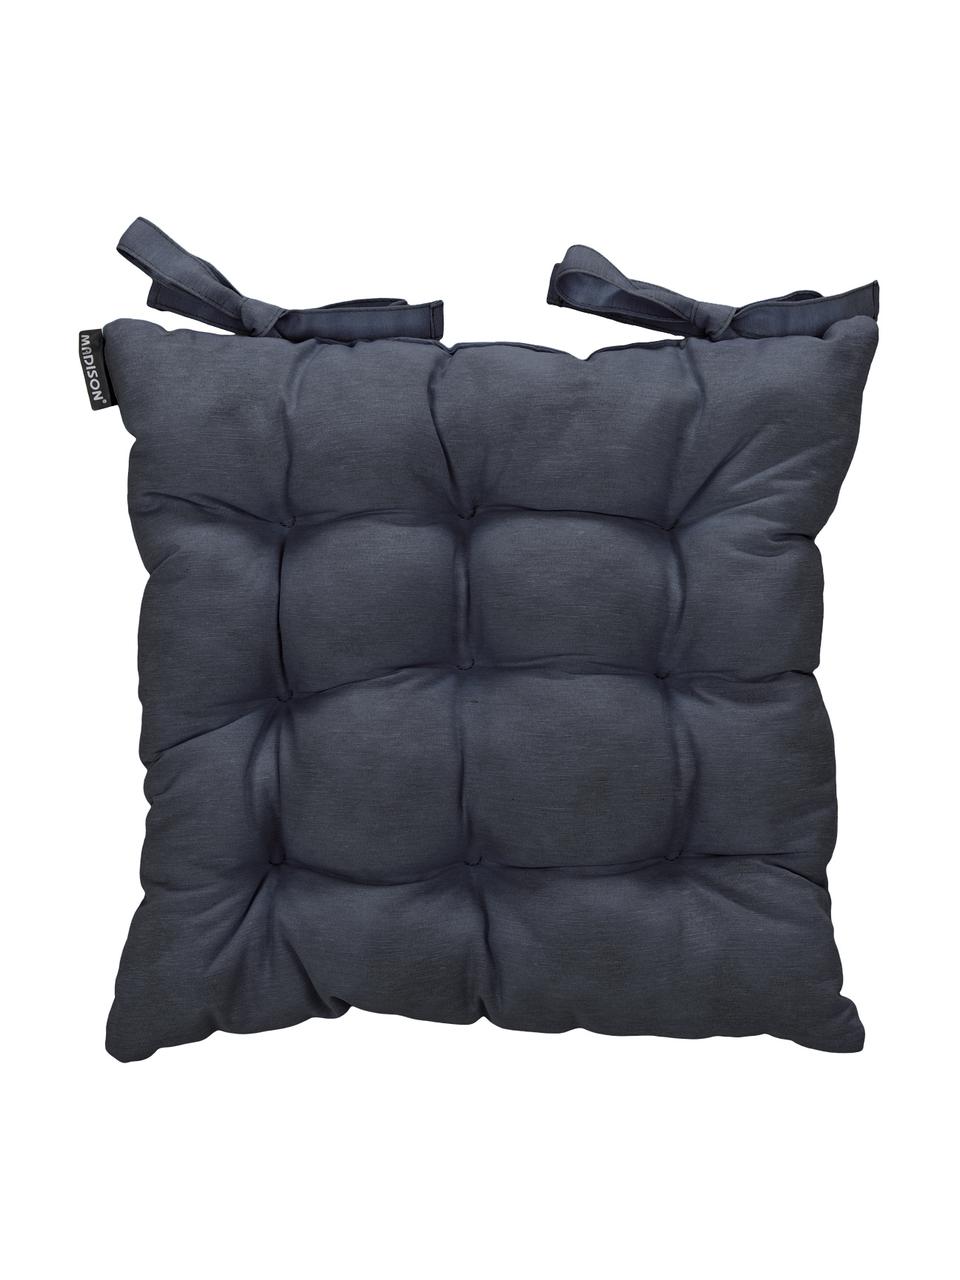 Coussin de chaise anthracite Panama, Anthracite, larg. 45 x long. 45 cm